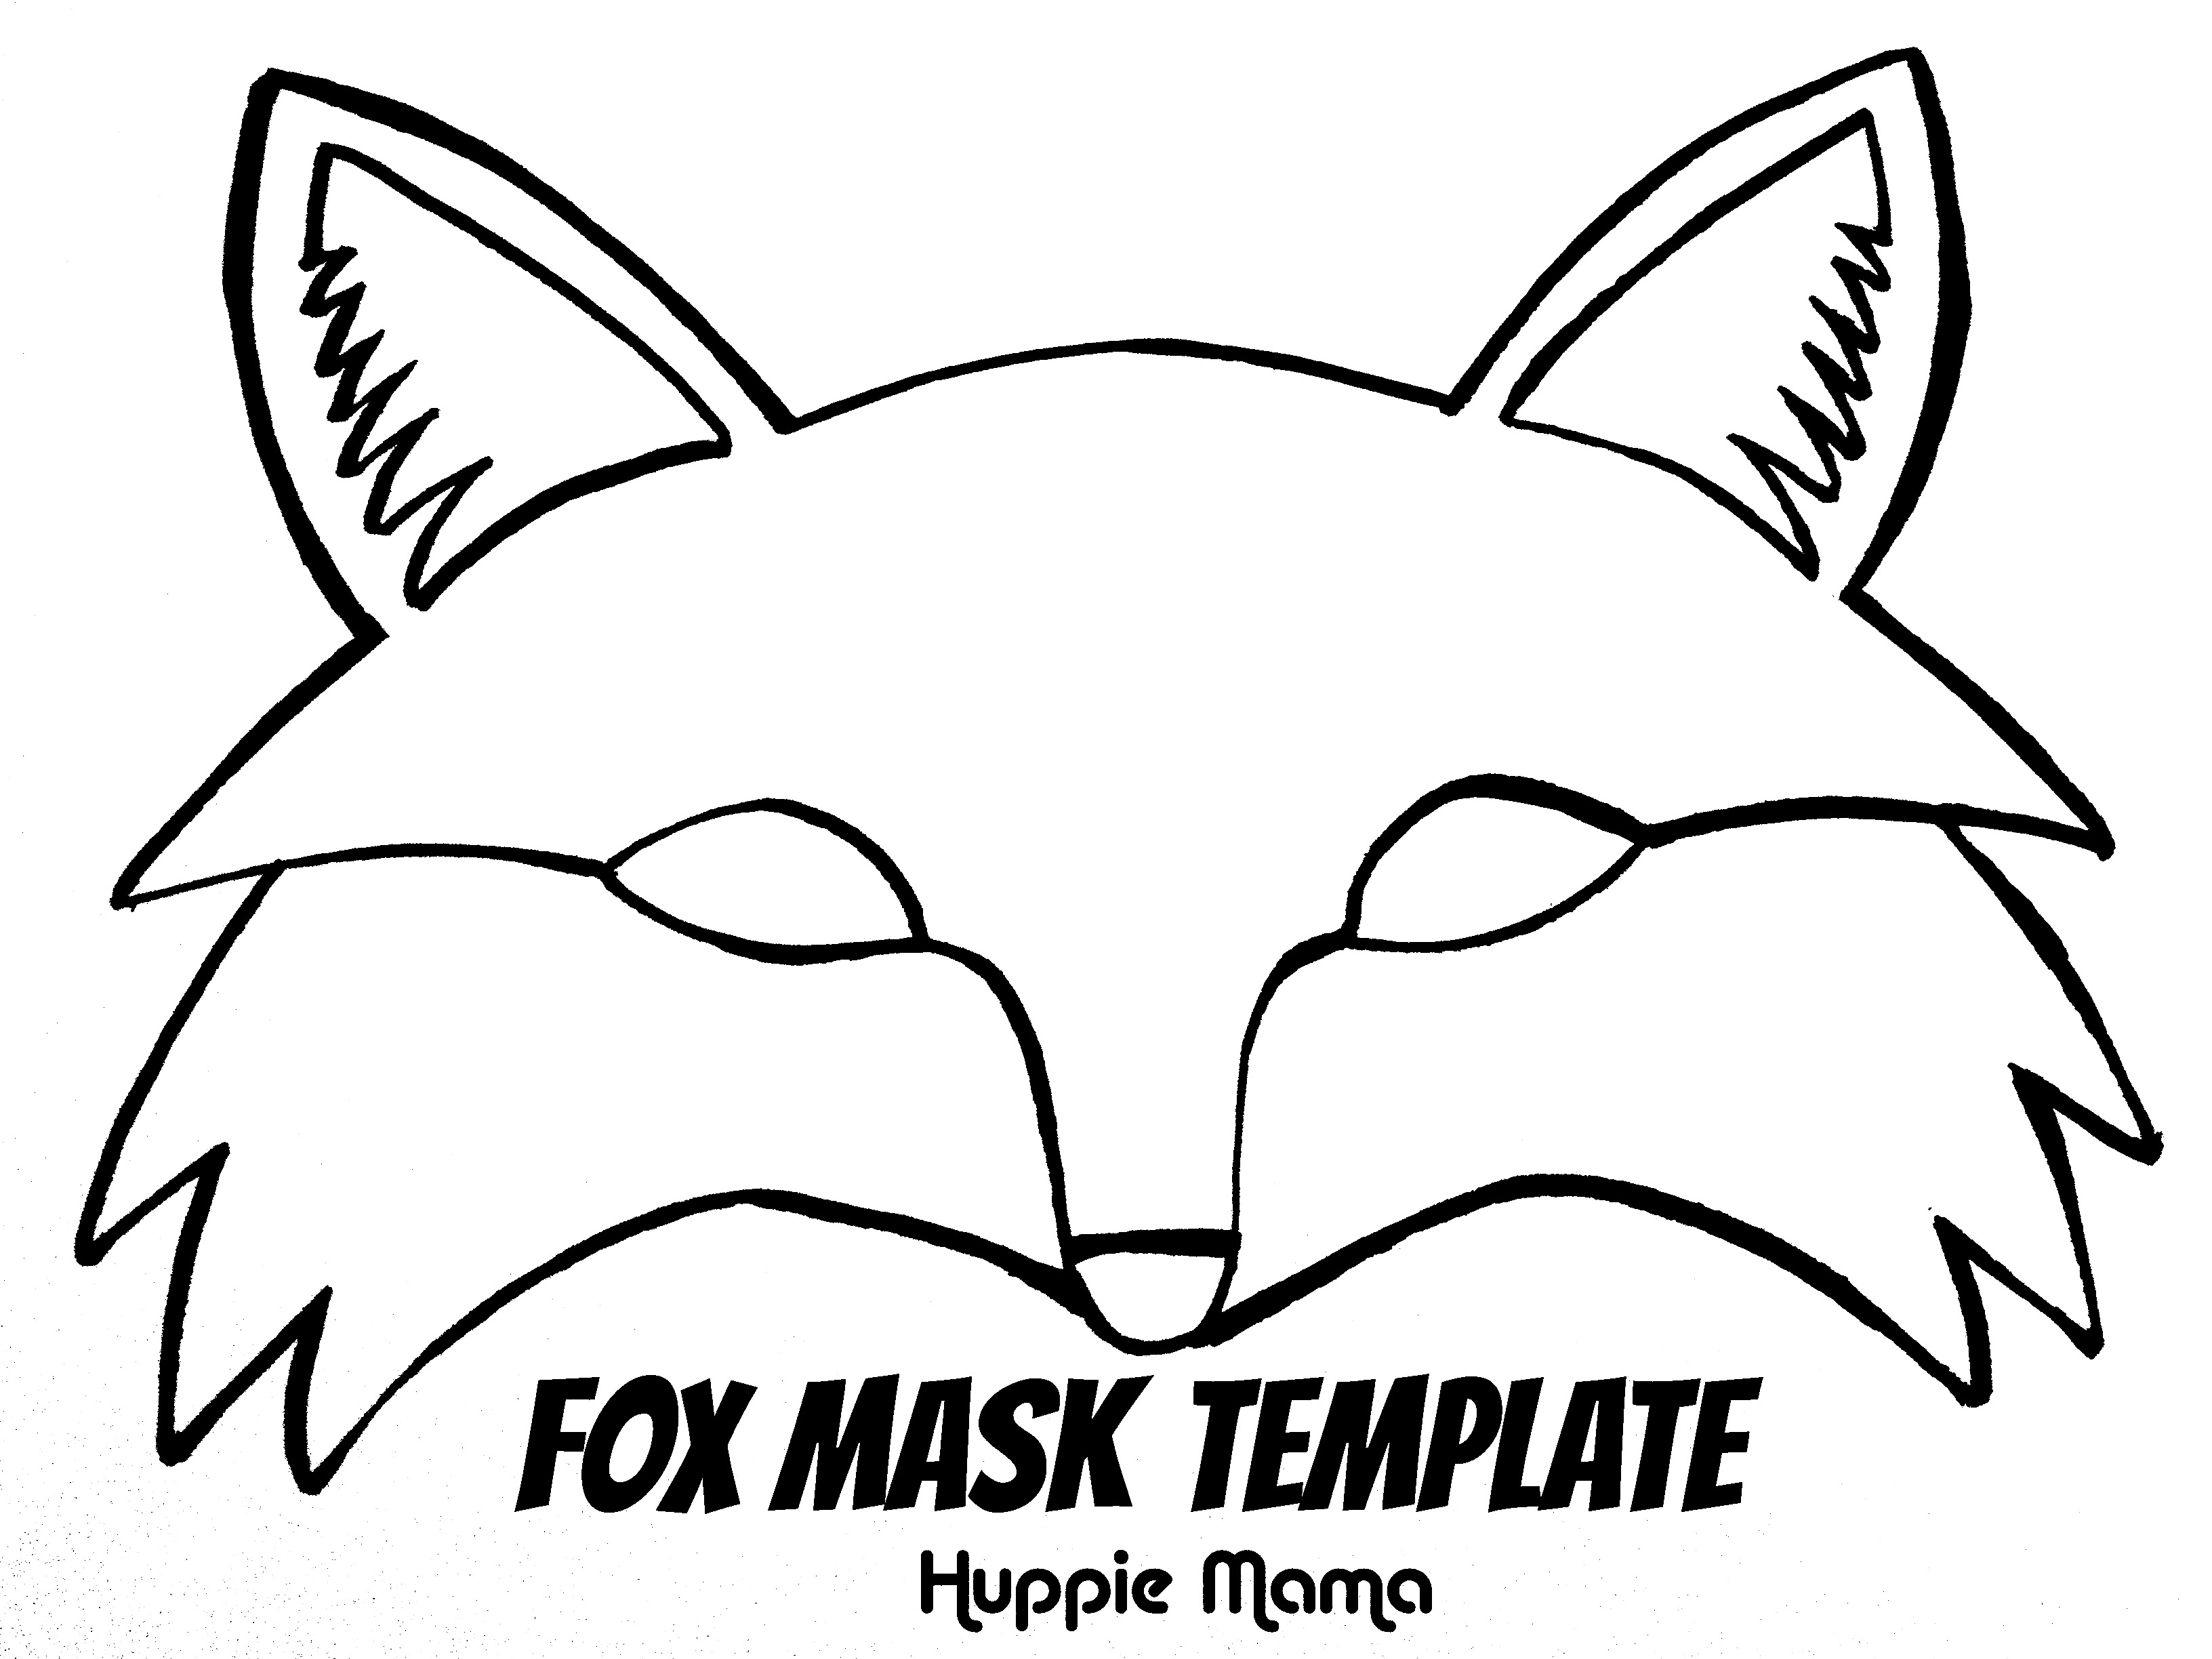 Fox Mask Template Our Potluck Family